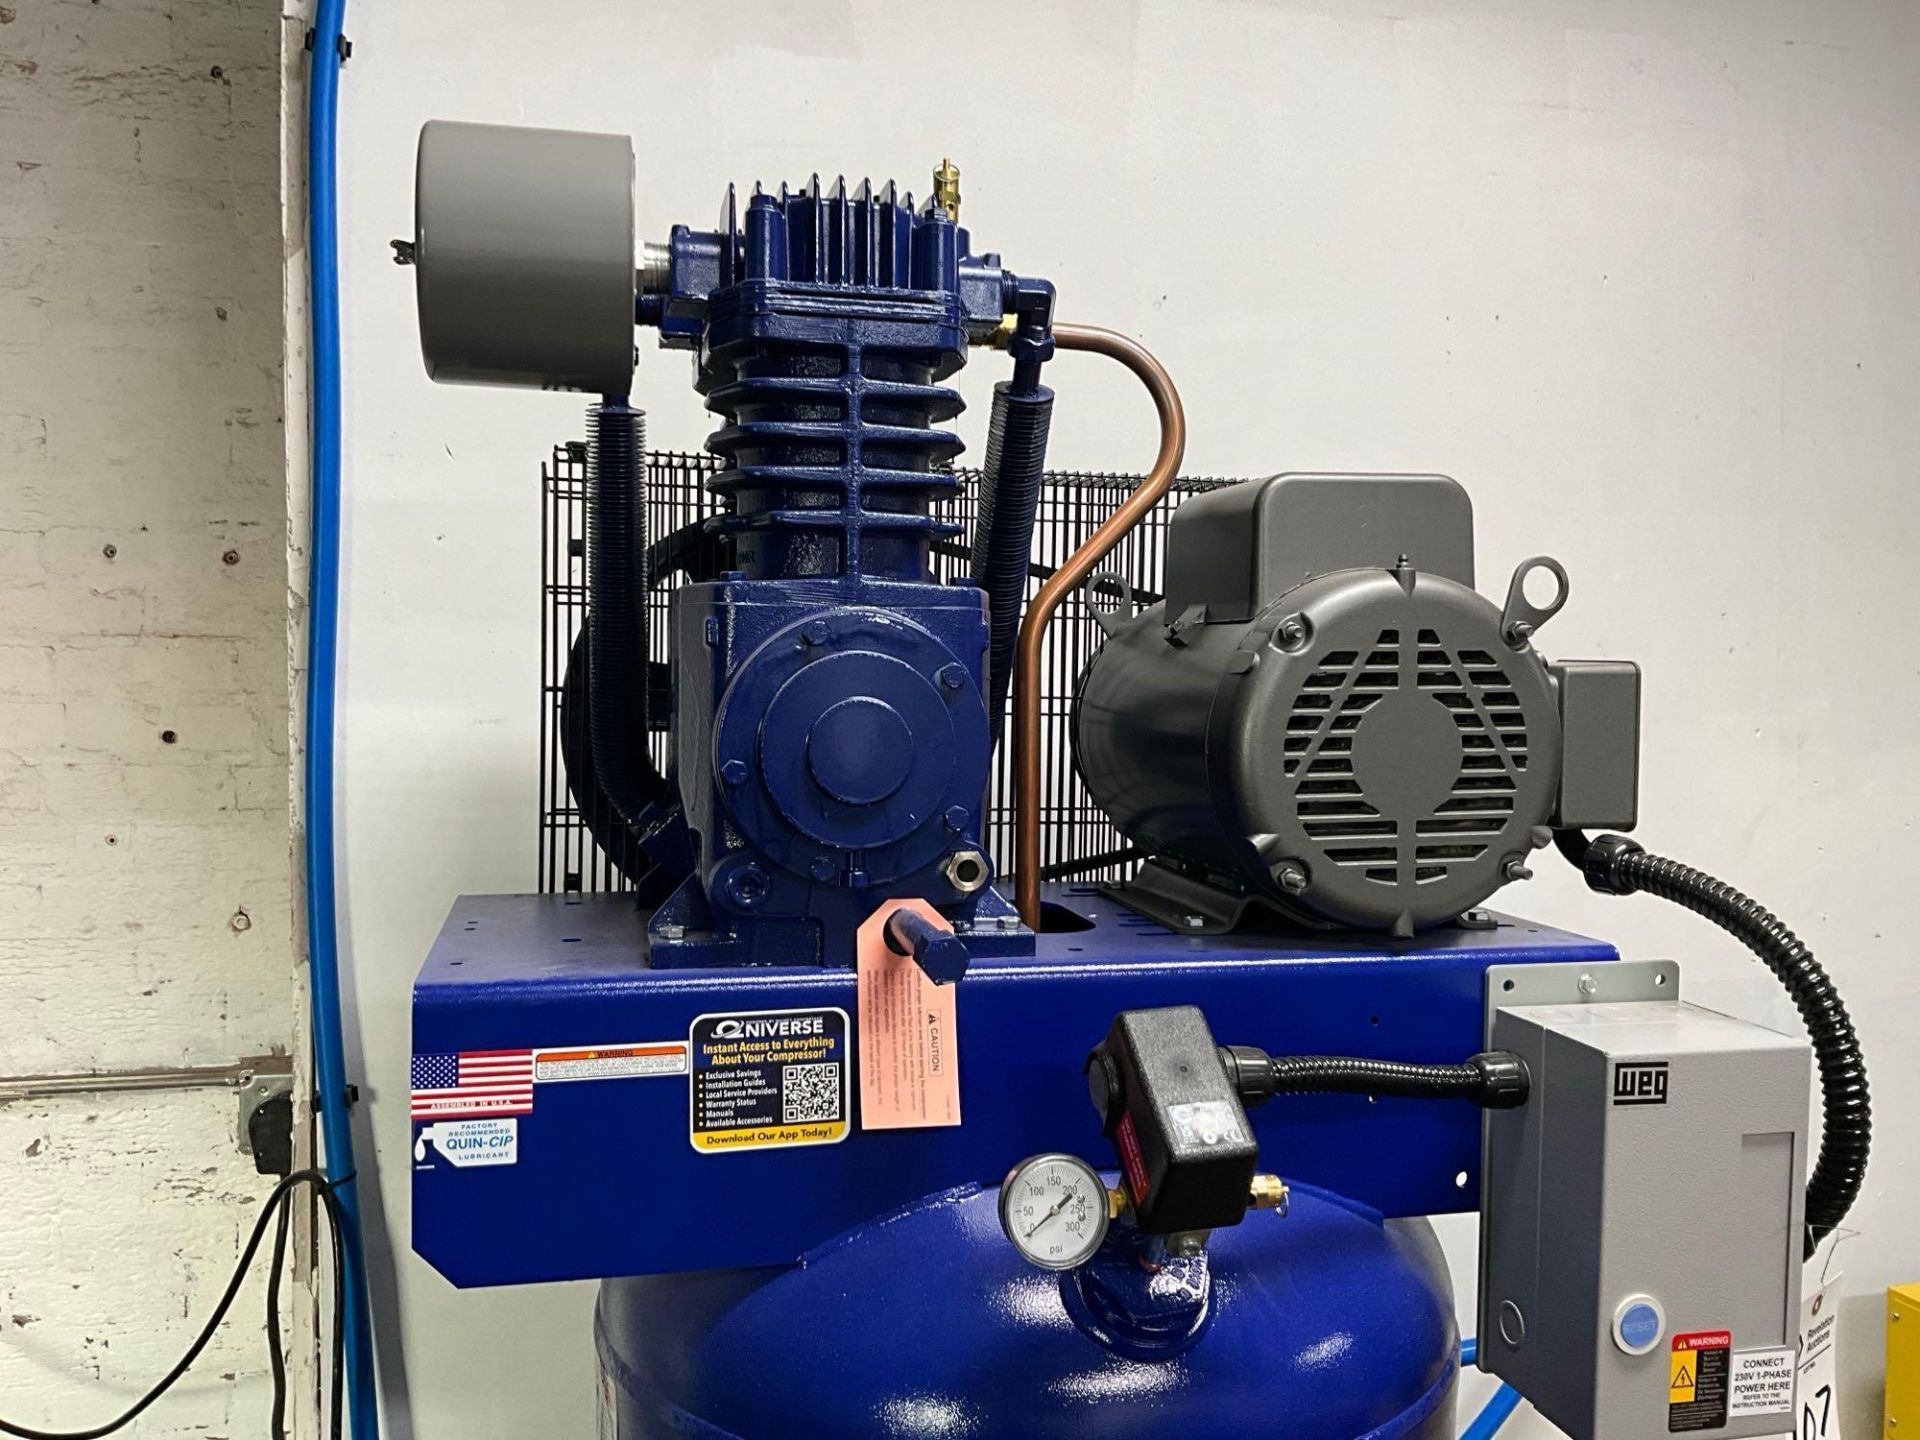 QUINCY 7 1/2 HP 80 GALLON COMPRESSOR WITH COOL 25 REFRIGERATED AIR DRYER - Image 3 of 13